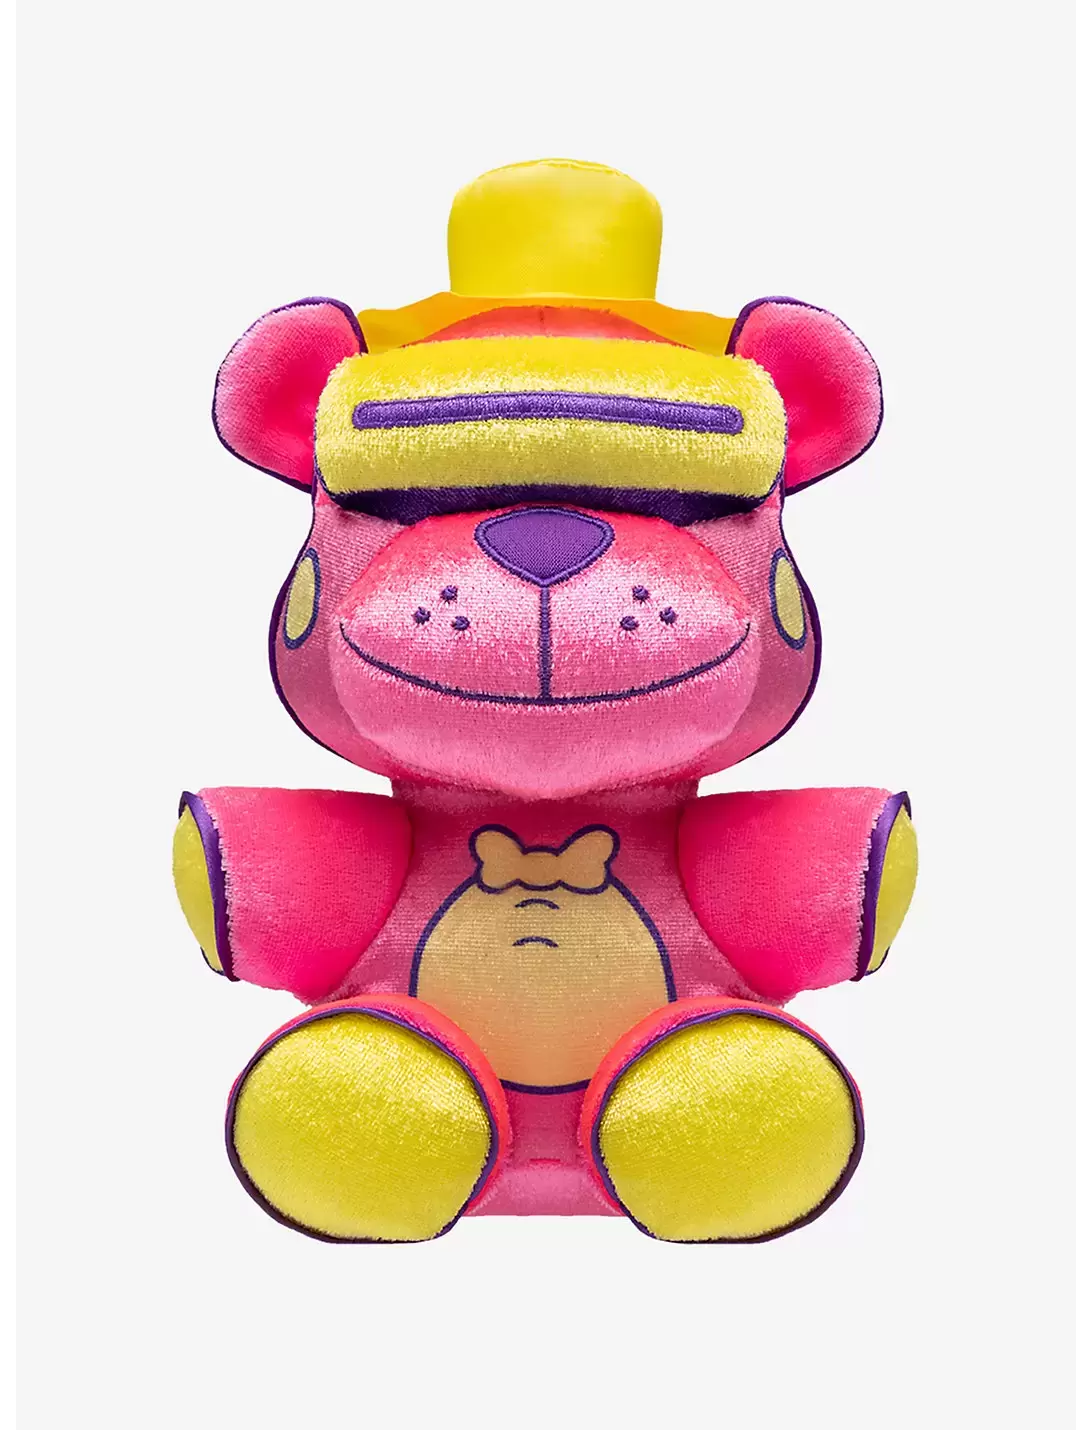 Funko Five Nights at Freddy's Plush Series 1 – Undiscovered Realm